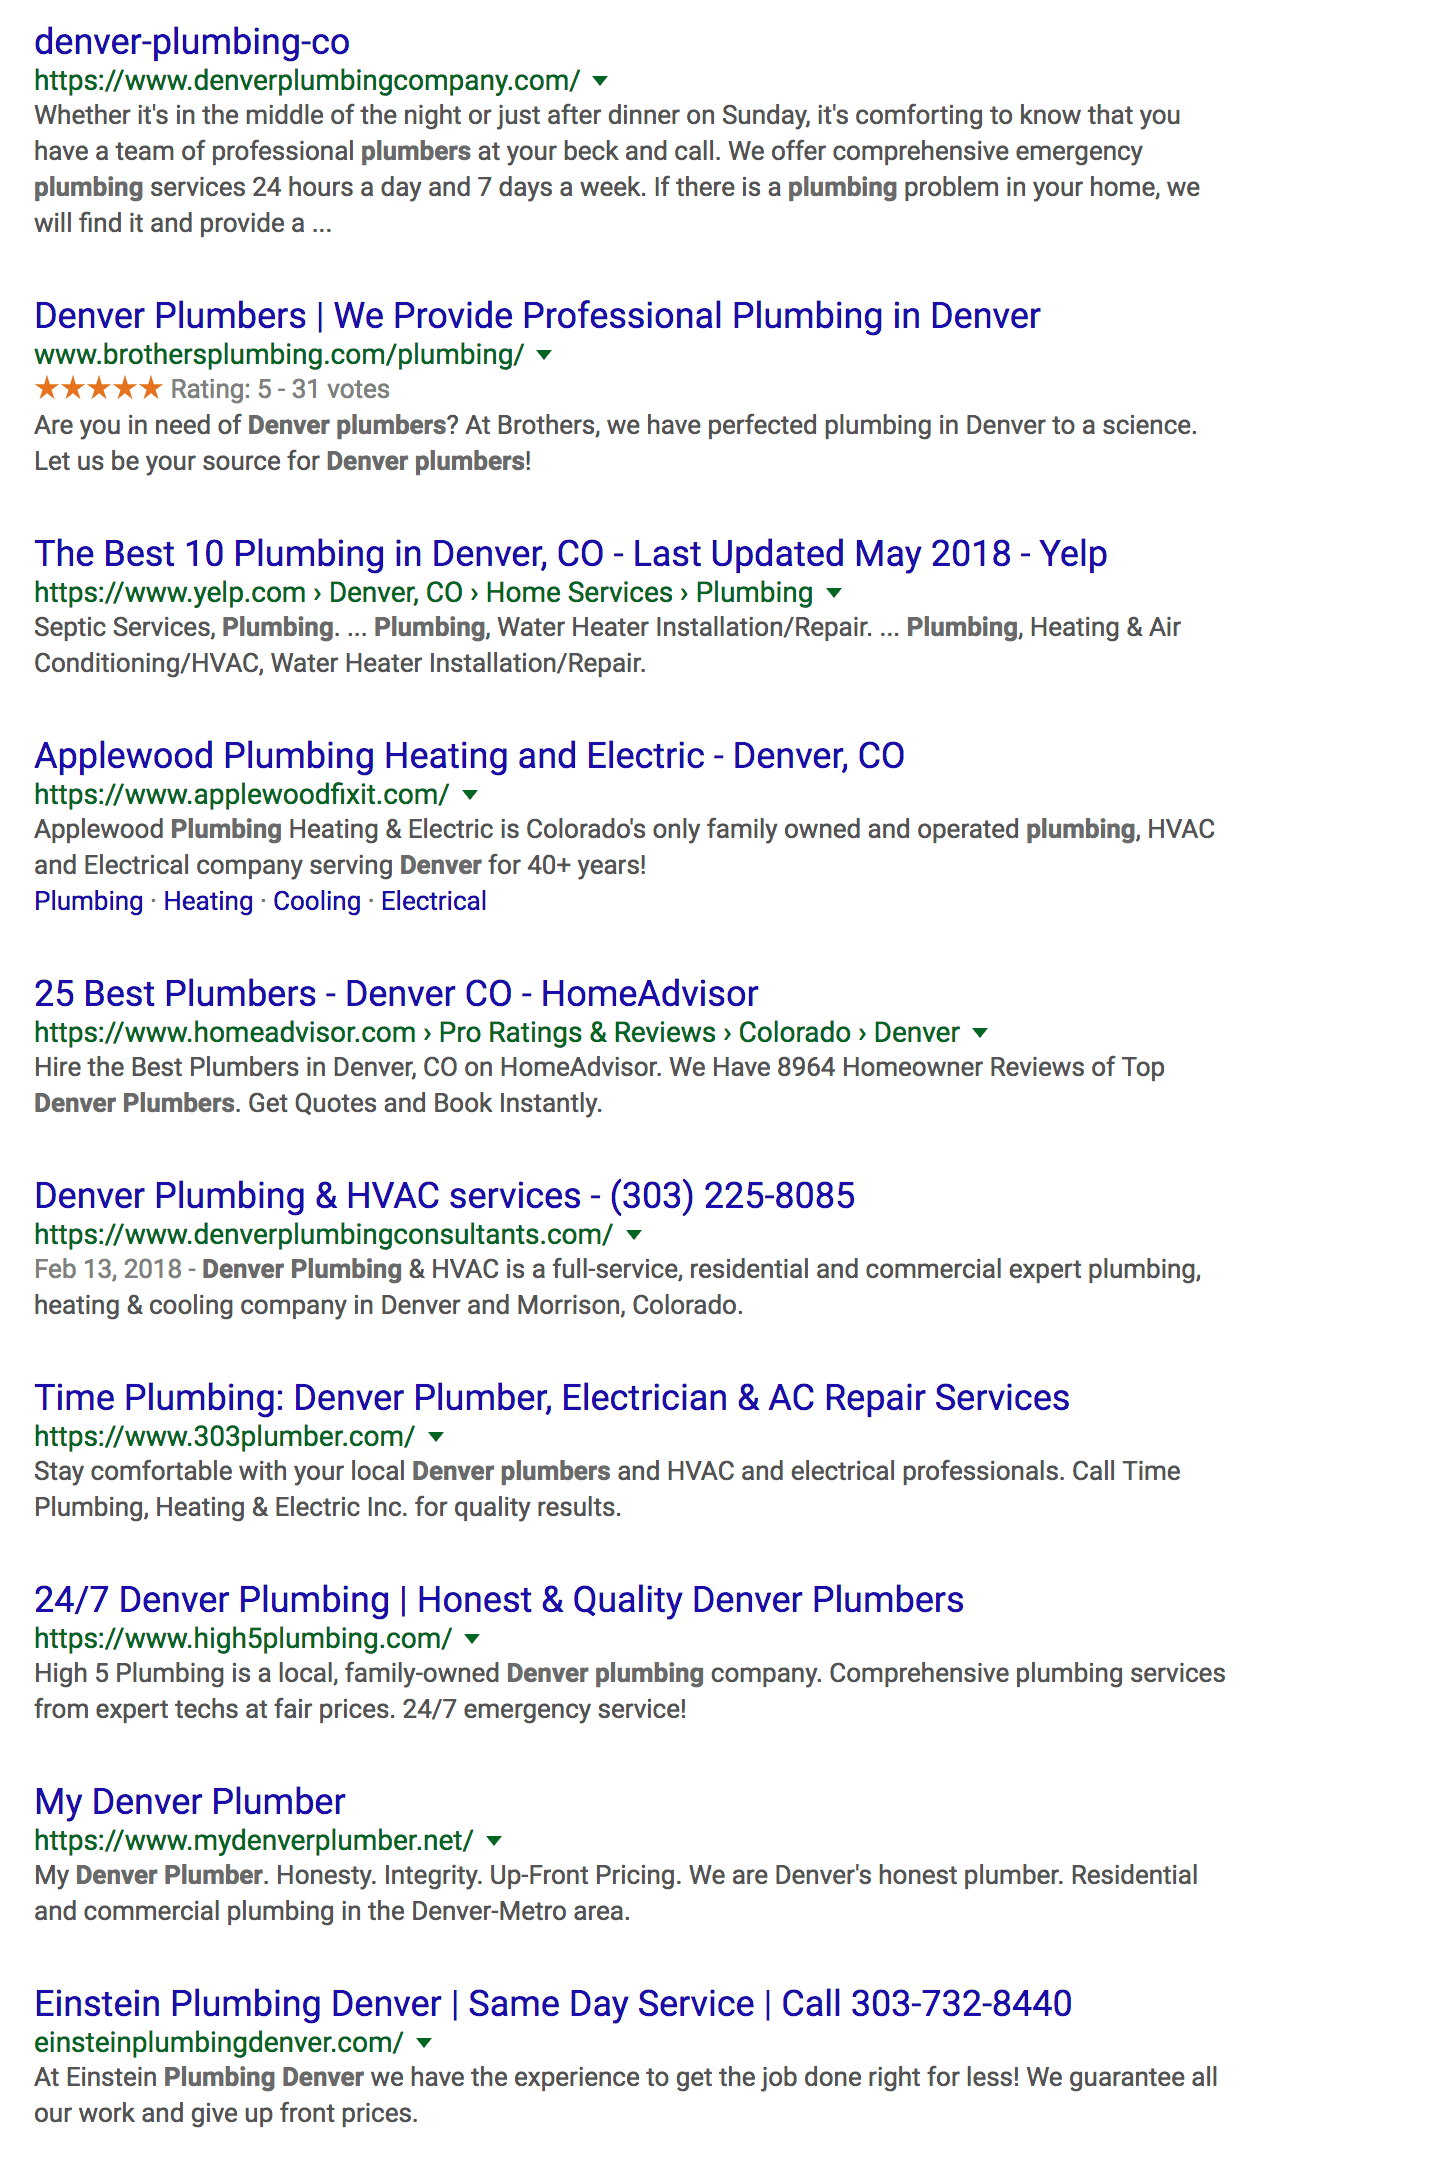 organic search results for plumbers